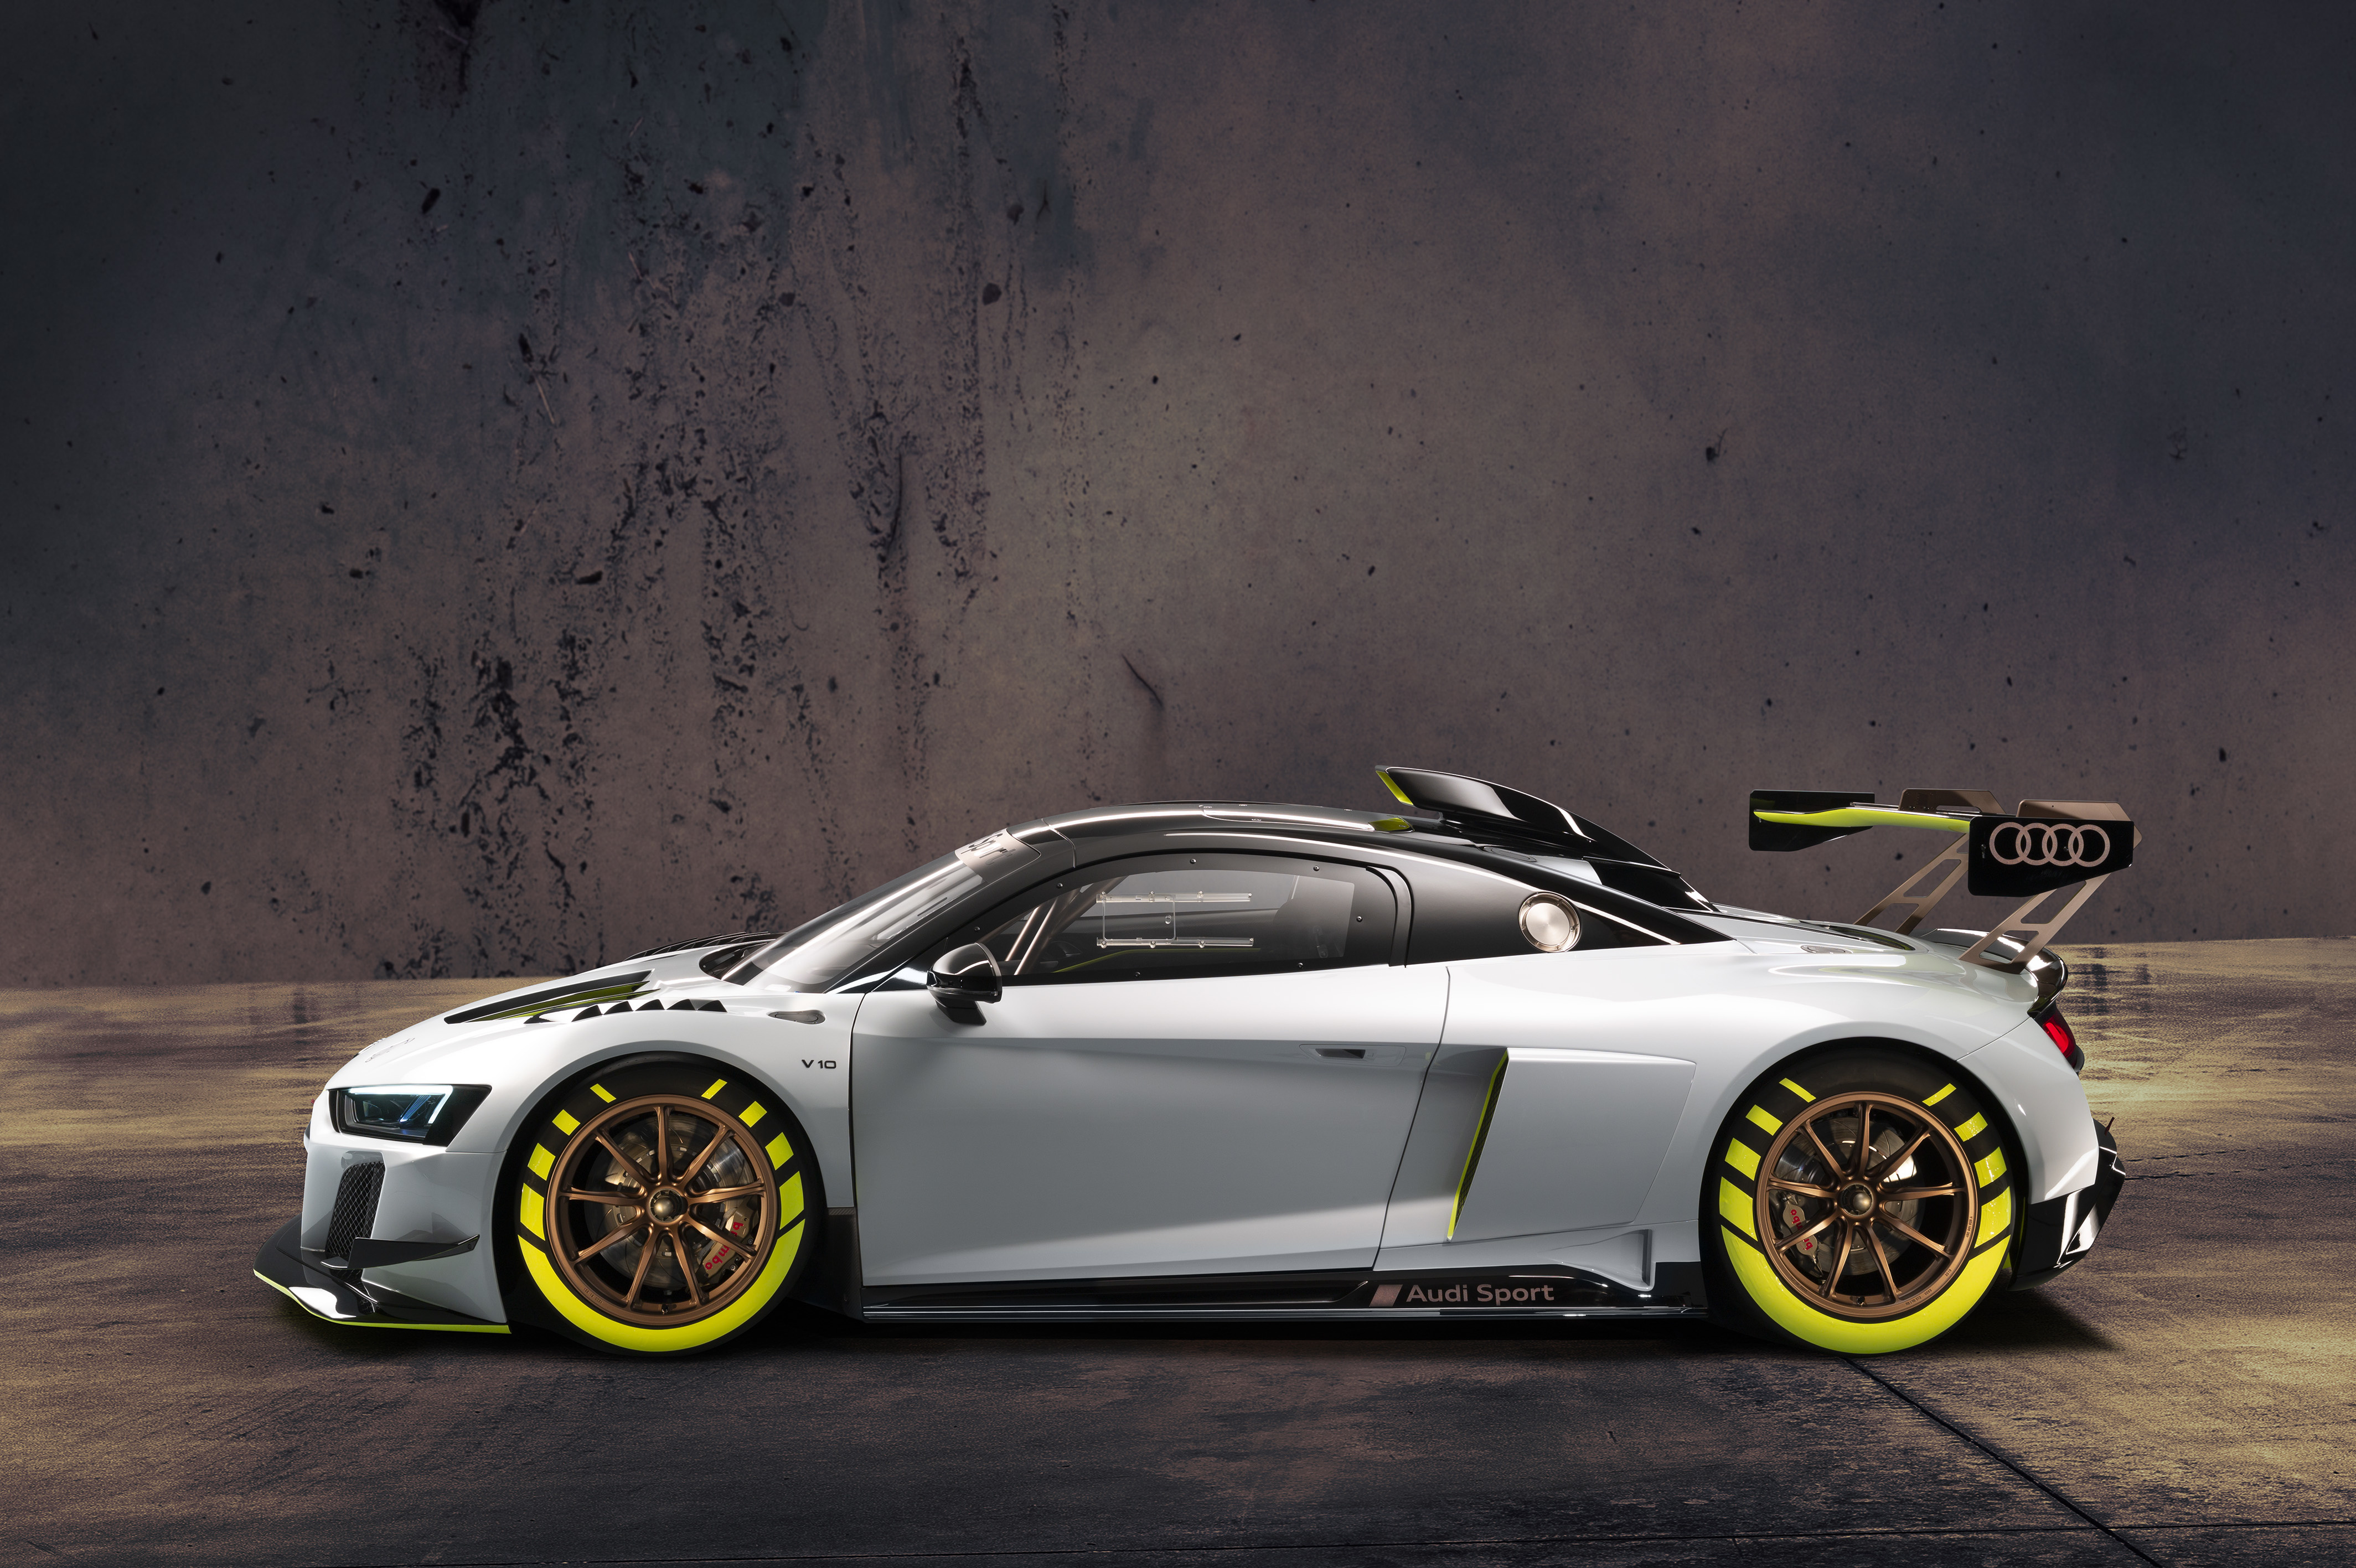 Audi R8 Lms Gt2 Wallpapers